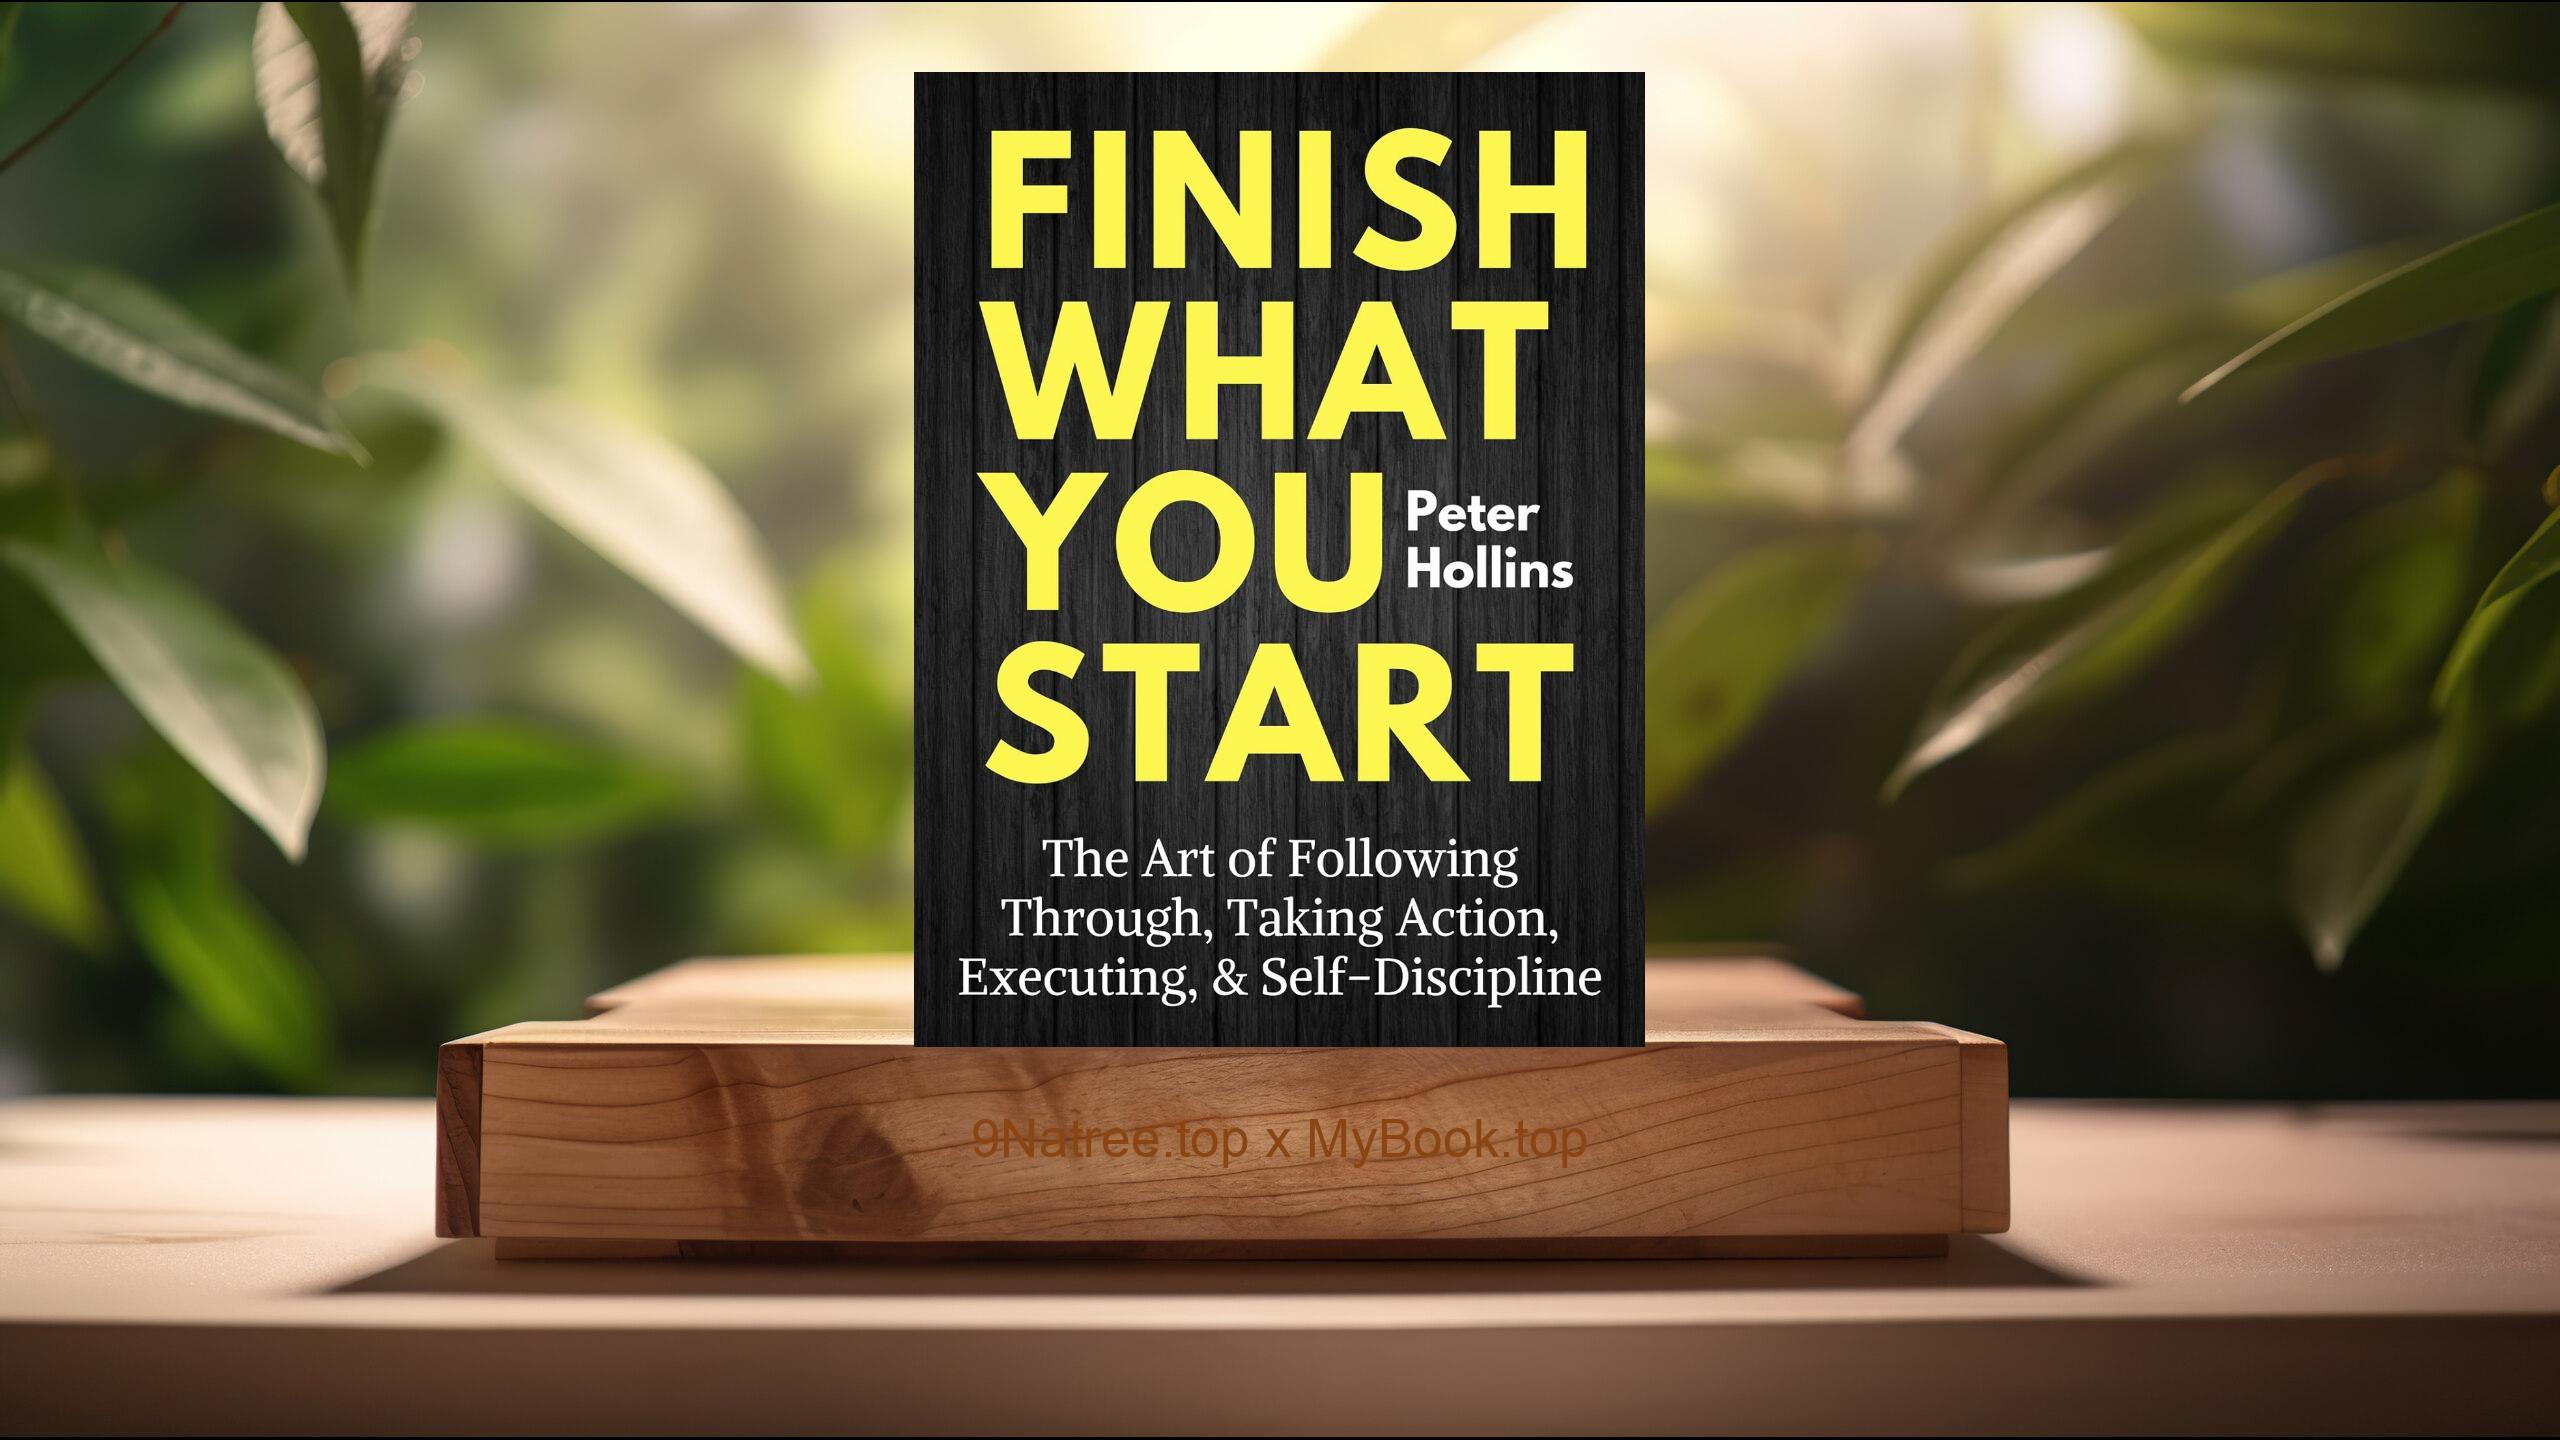 [Review] Finish What You Start: The Art of Following Through, Taking Action, Executing, & Self-Discipline (Live a Disciplined Life Book 2) (Peter Hollins) Summarized